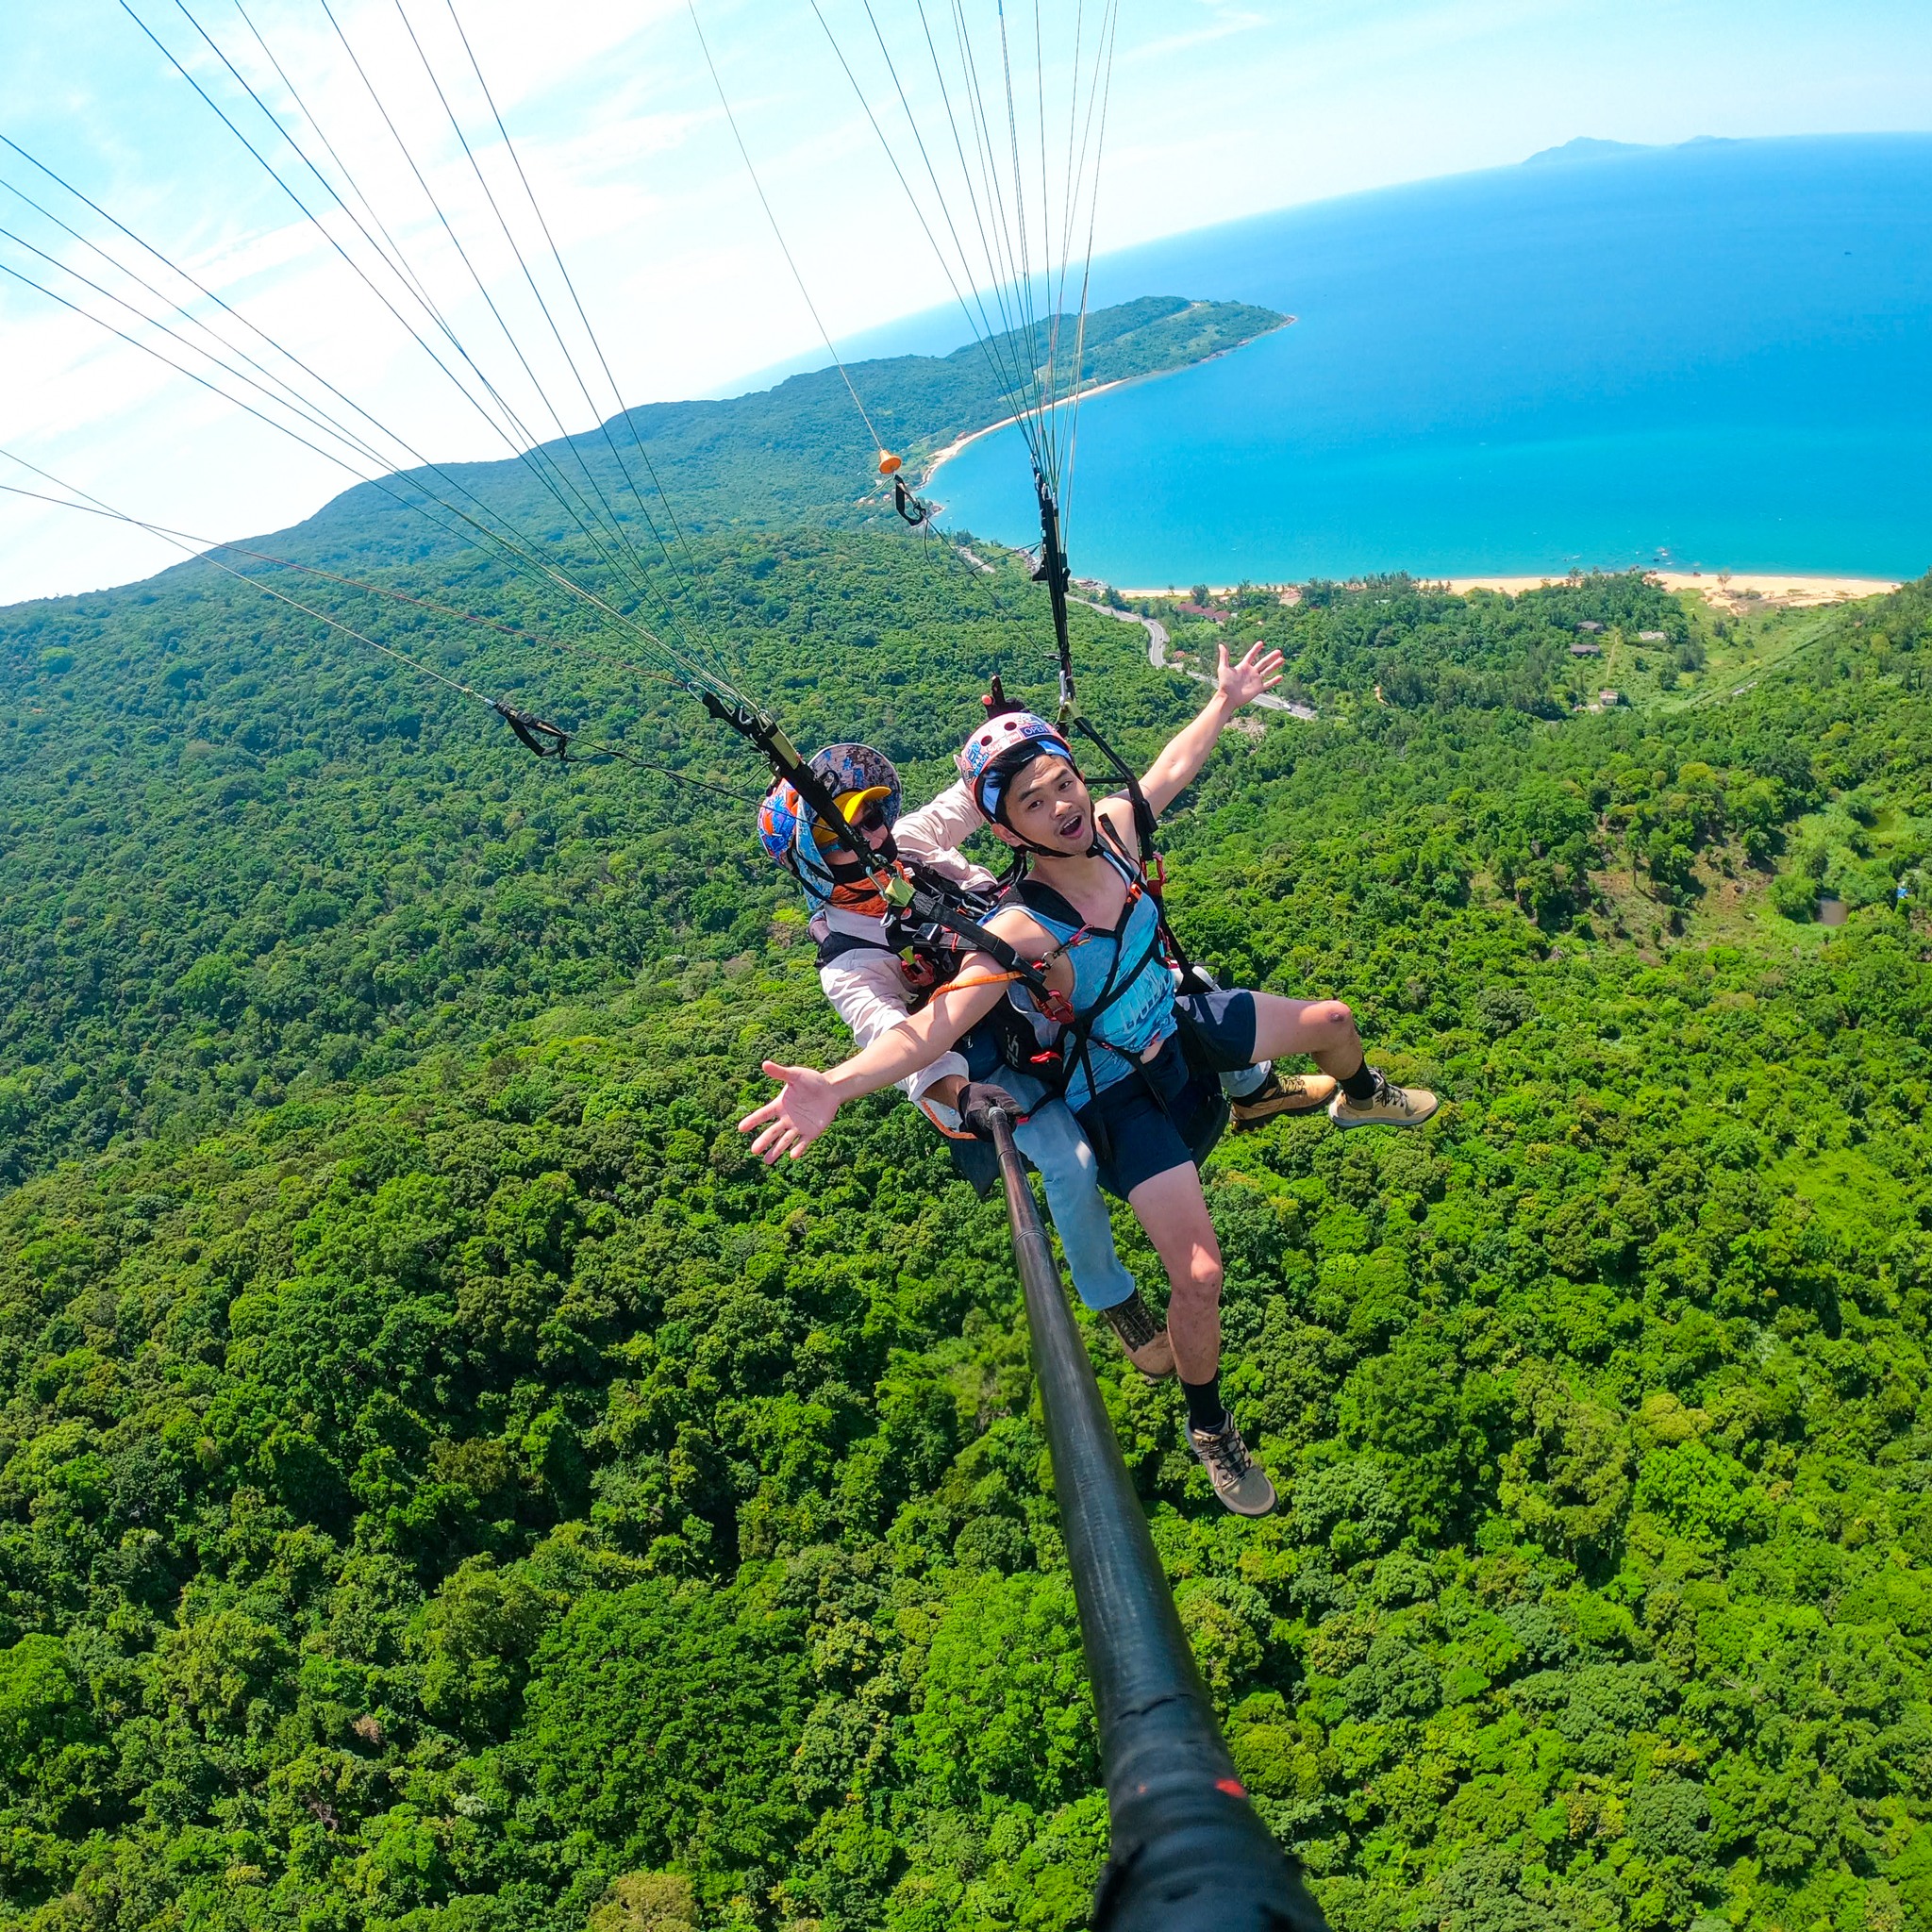 The starting point is usually Son Tra peninsula with an altitude of nearly 700m above sea level. A paragliding flight costs 1,8 million VND. You will be accompanied by an experienced pilot who will guide you, ensure your safety while flying, and assist in capturing memorable moments.